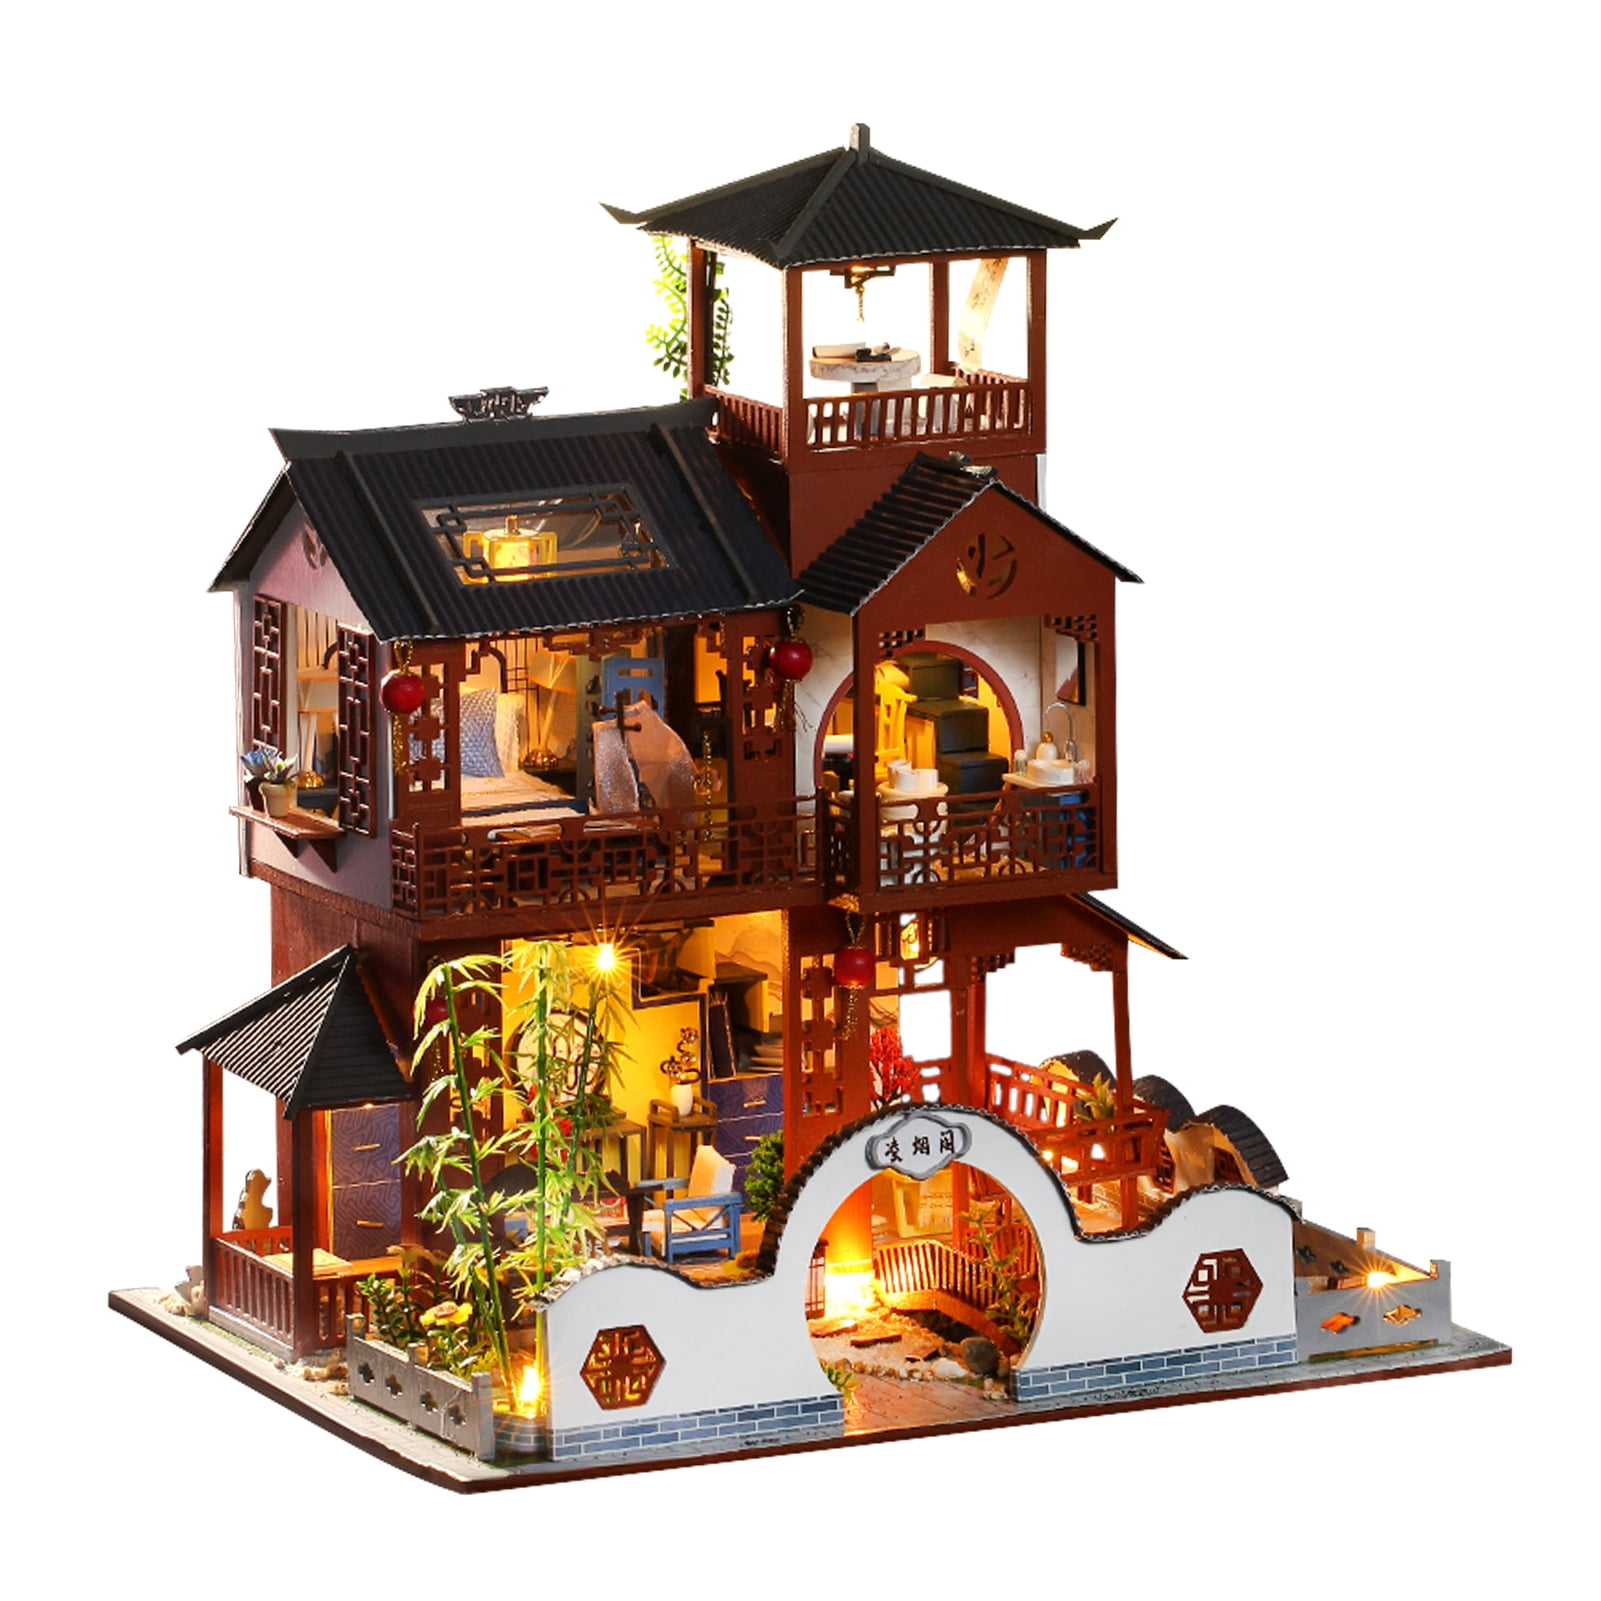 WYD DIY Chinese DIY Doll House Ancient Architecture Handmade Mini Wooden House Miniature Dollhouse Furniture Set Children Toys New Year Birthday Wedding Gift Panxi Tea House